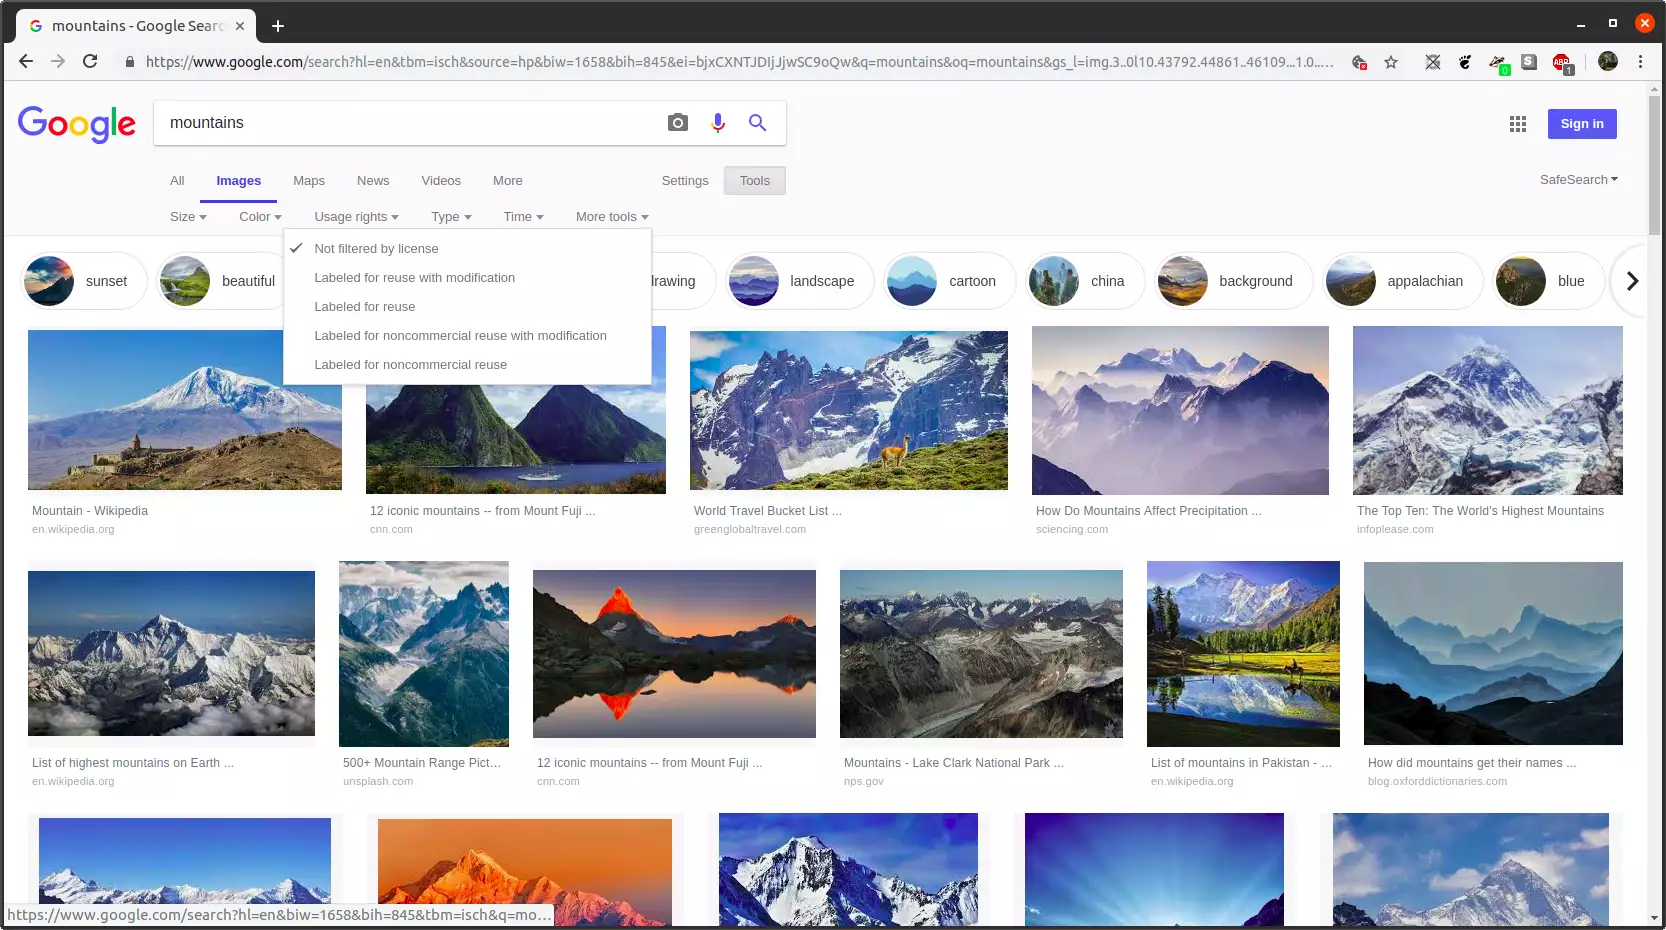 Google Images results page for the search term "mountain" with the Usage rights drop-down menu open